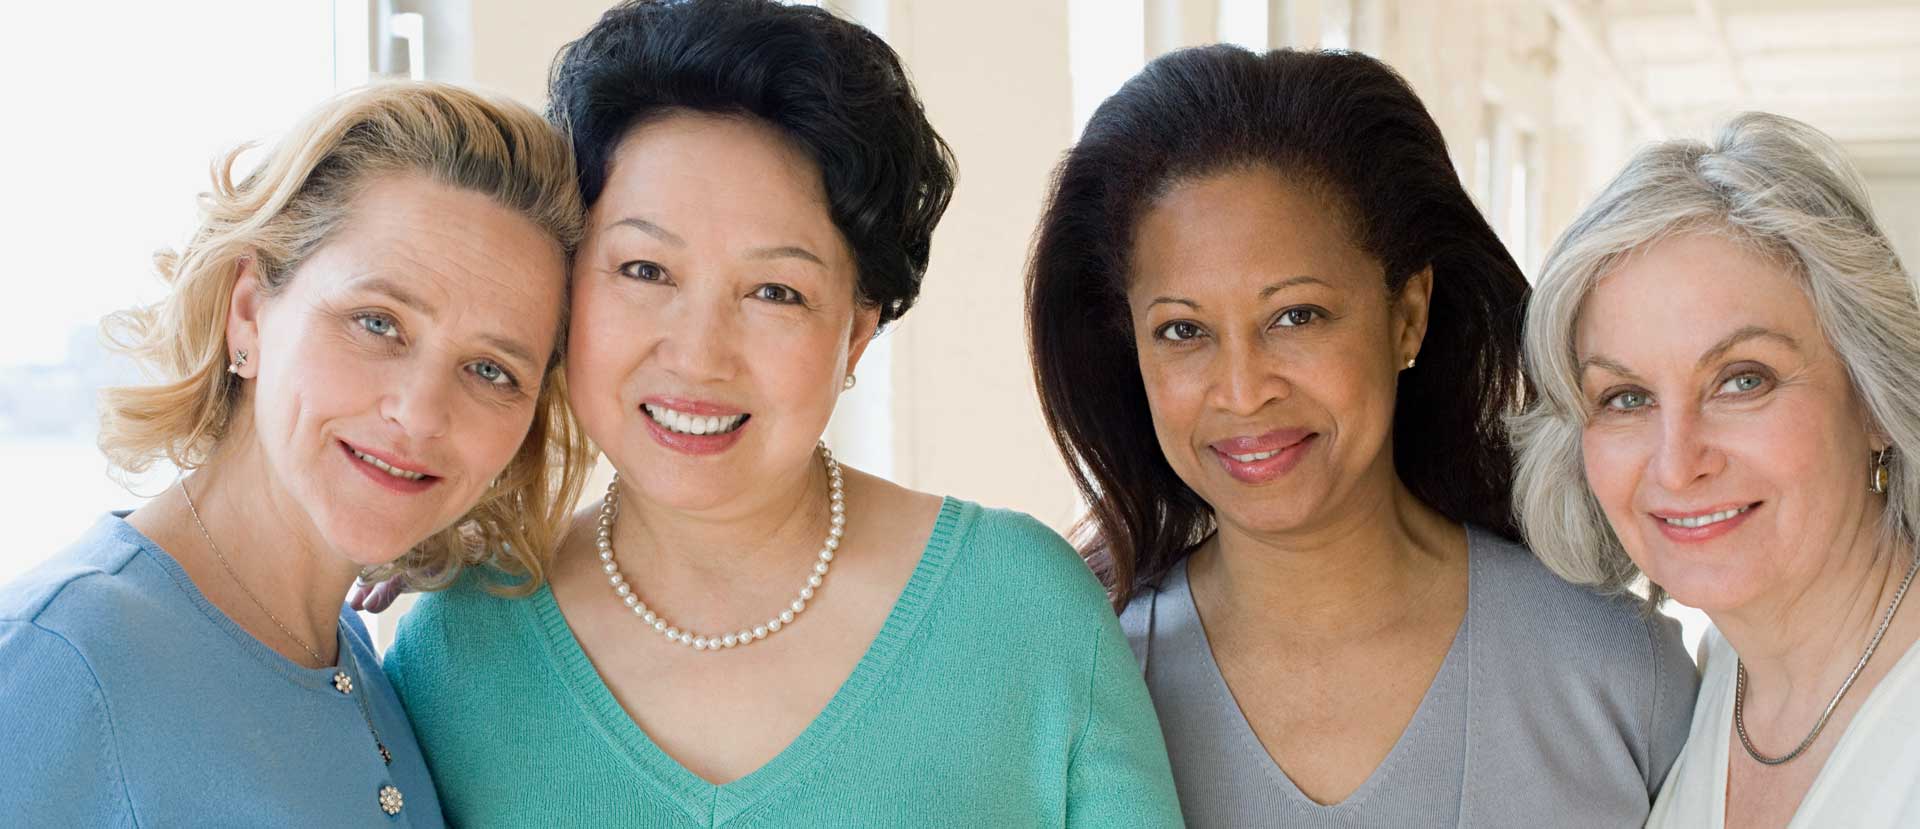 North Pointe OB/GYN Associates, LLC - Cumming Obstetricians & Gynecologists helps mature women manage menopause